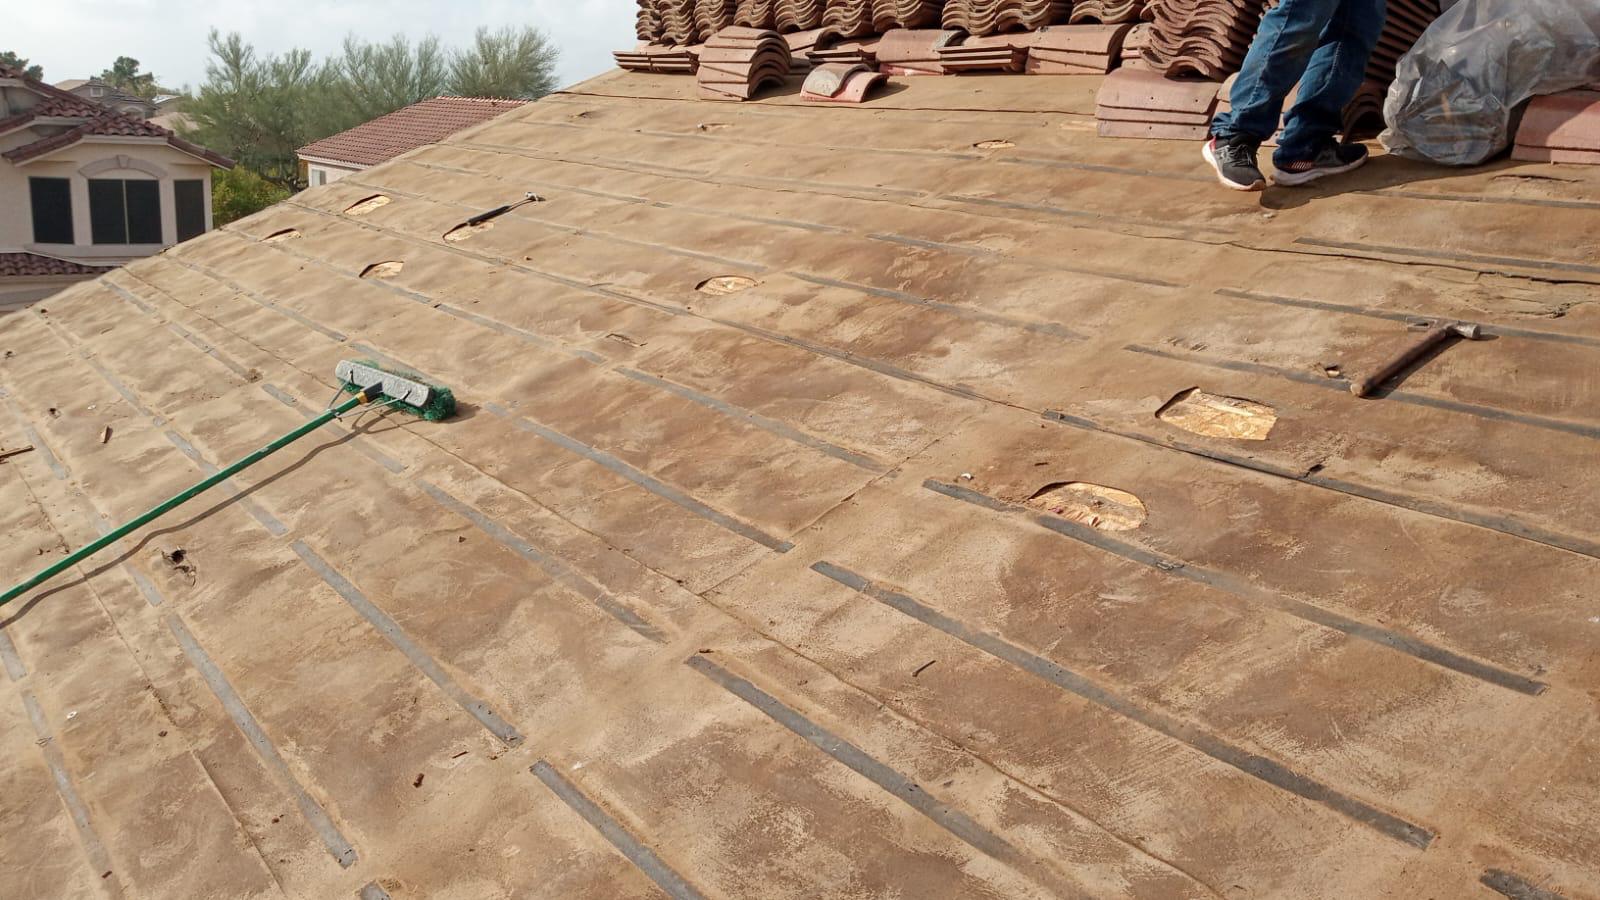 Behmer Roofing's craftsmanship in progress, with a focus on tile re-felting, ensuring a durable roof for a Tempe home.